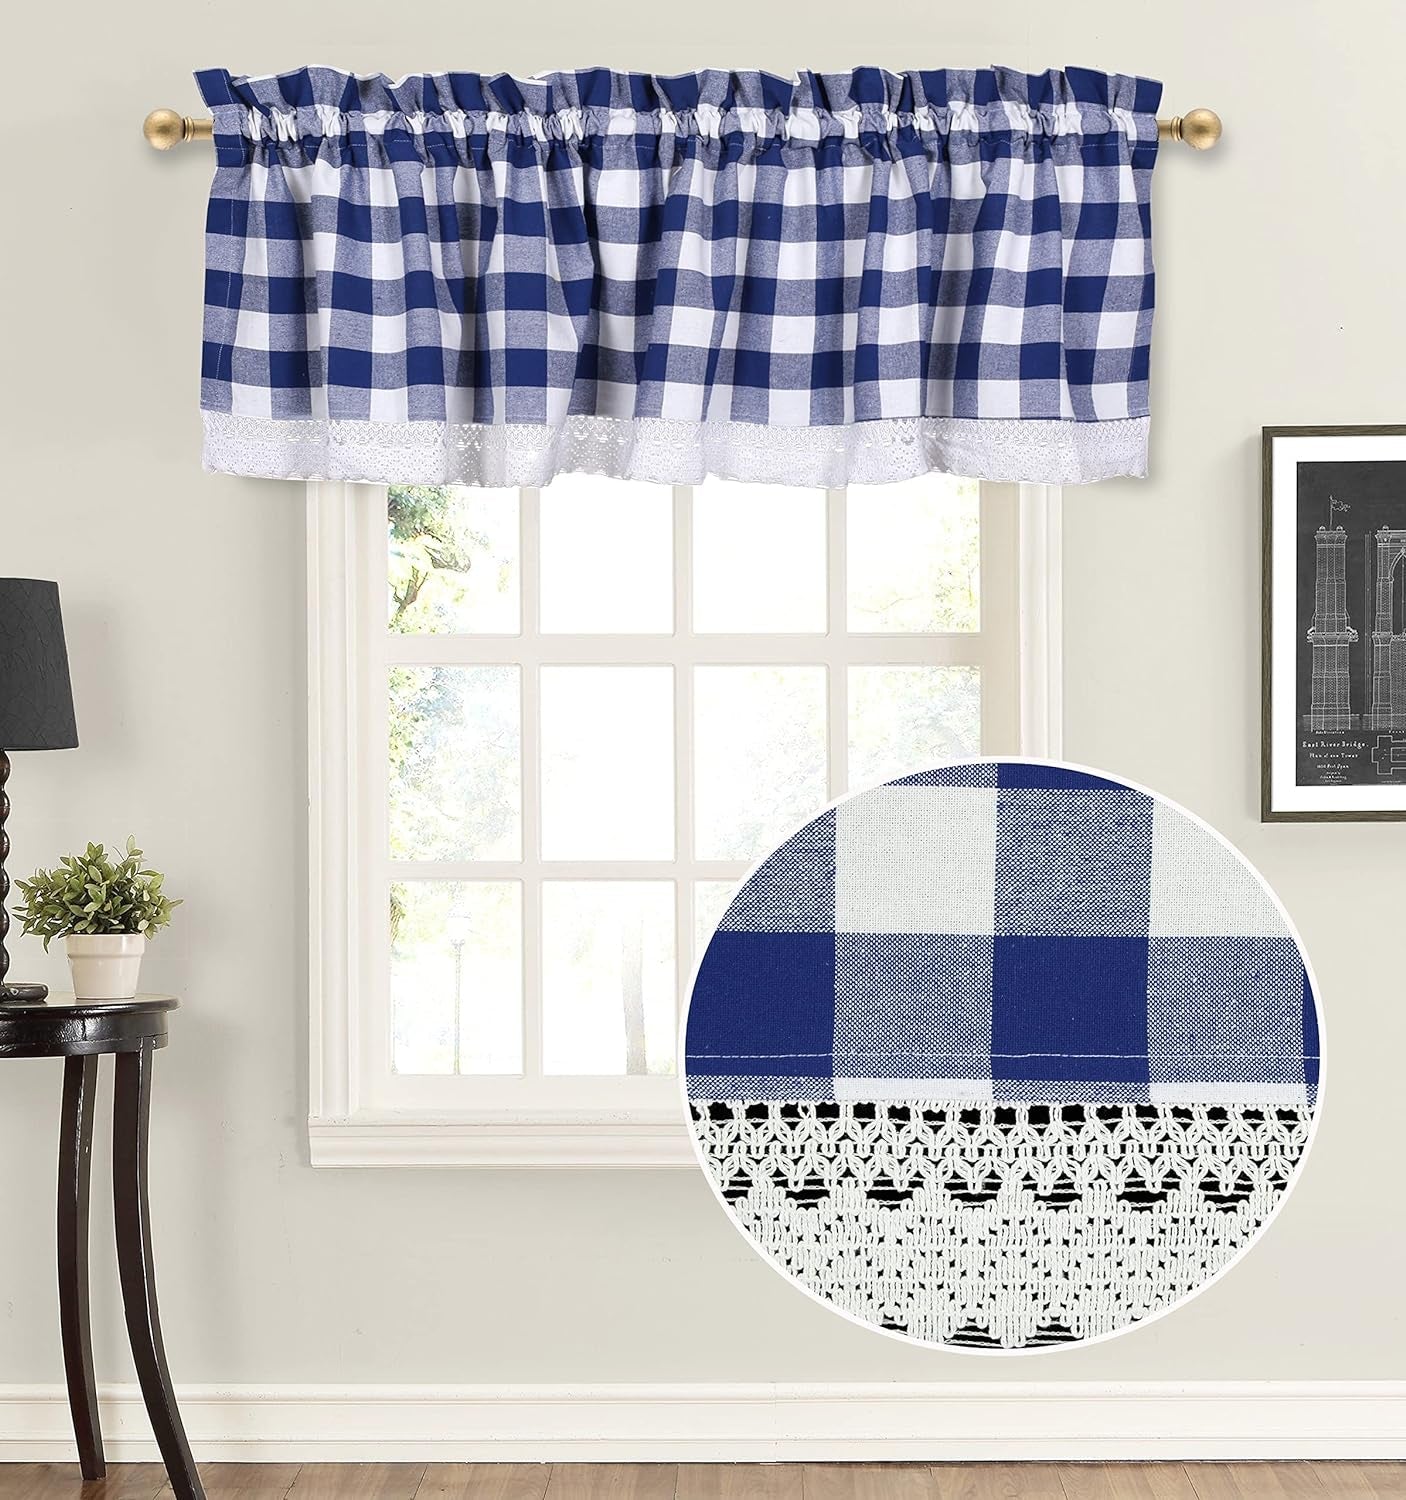 Navy and White Valance, Valances, Navy Check Valance, 2 Inch Rod Pocket Valances for Windows, Valance for Kitchen, Bath, Bed and Dining Room, 2Pack Gingham Check Valance with Lace-16X72 Inch